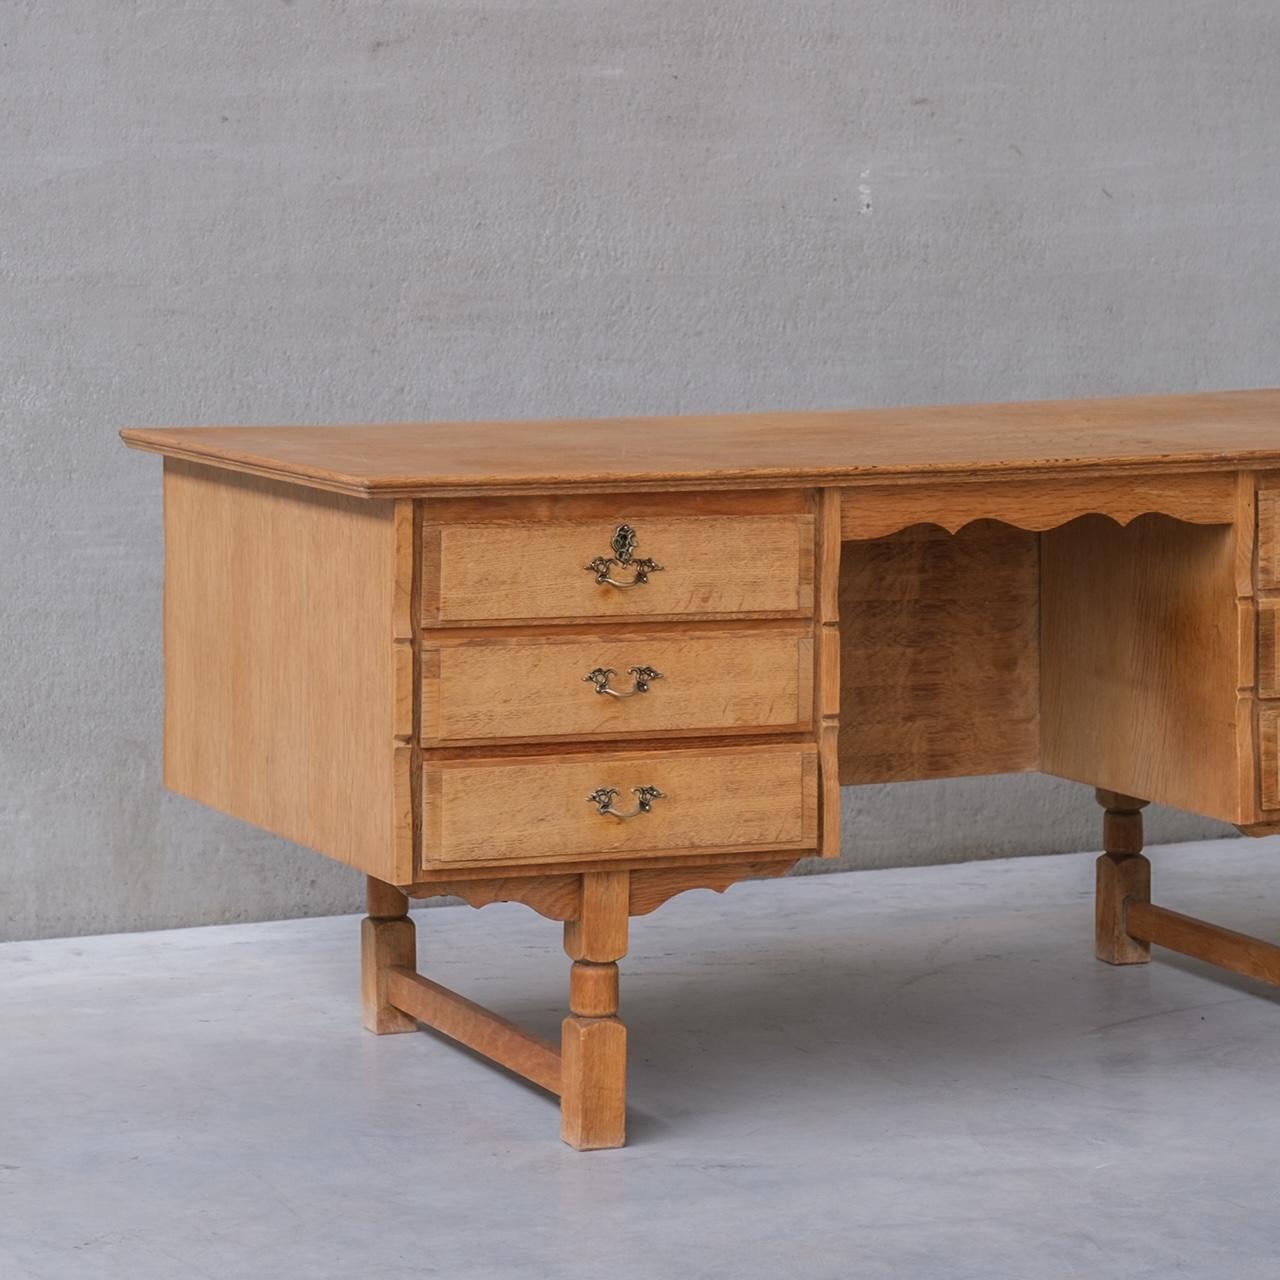 Oak Danish Midcentury Desk Attributed. to Henning Kjaernulf In Good Condition For Sale In London, GB